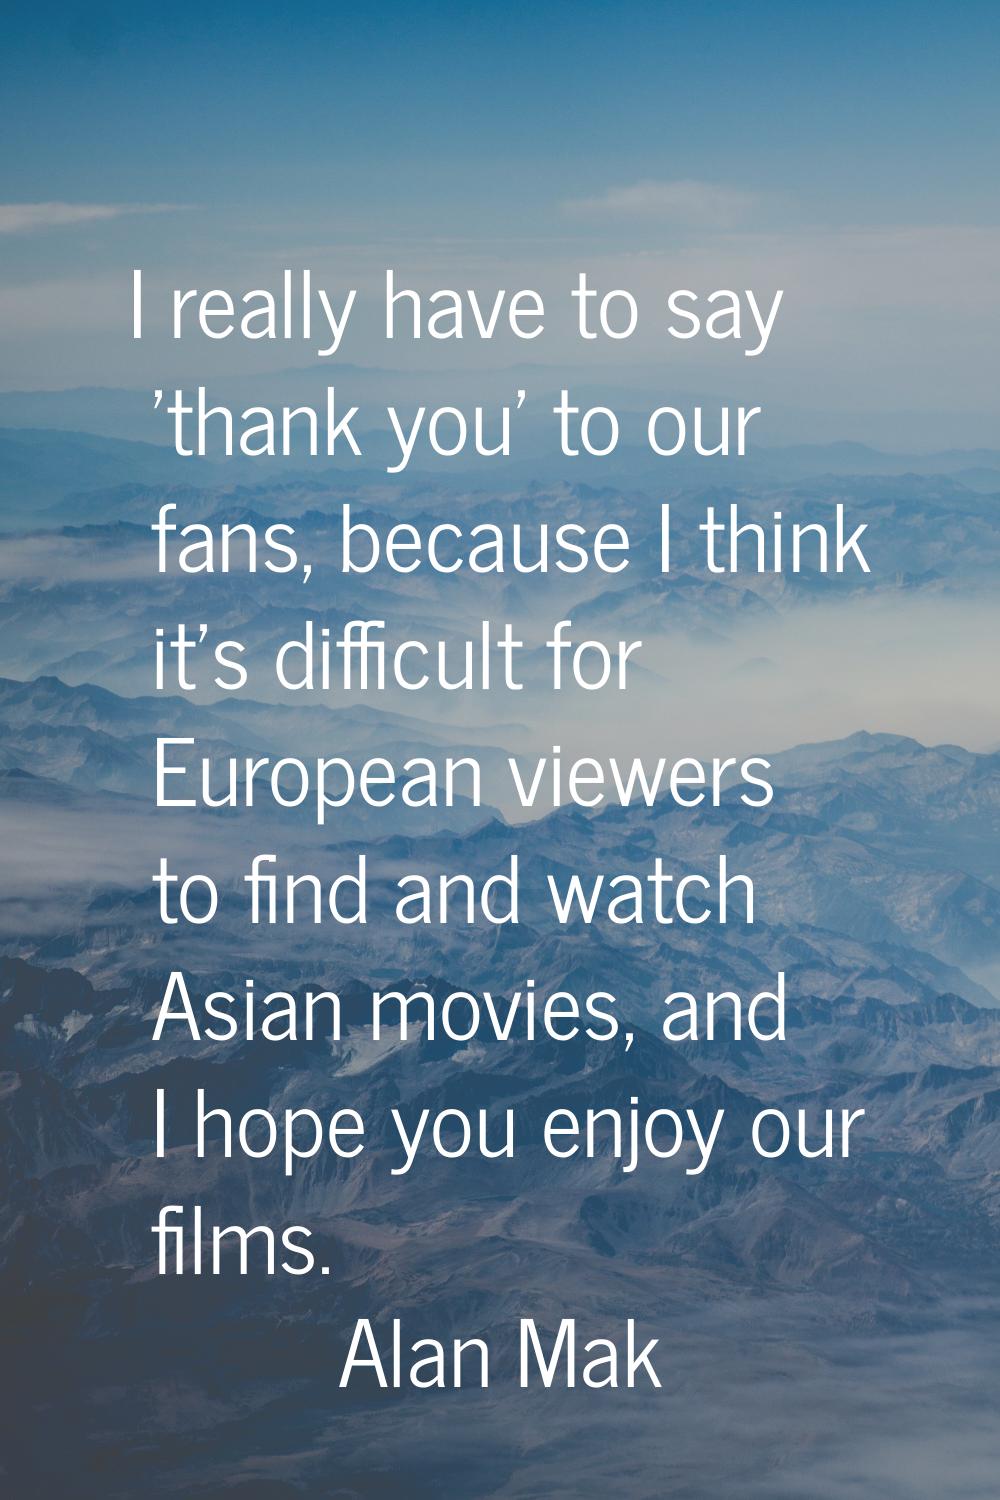 I really have to say 'thank you' to our fans, because I think it's difficult for European viewers t